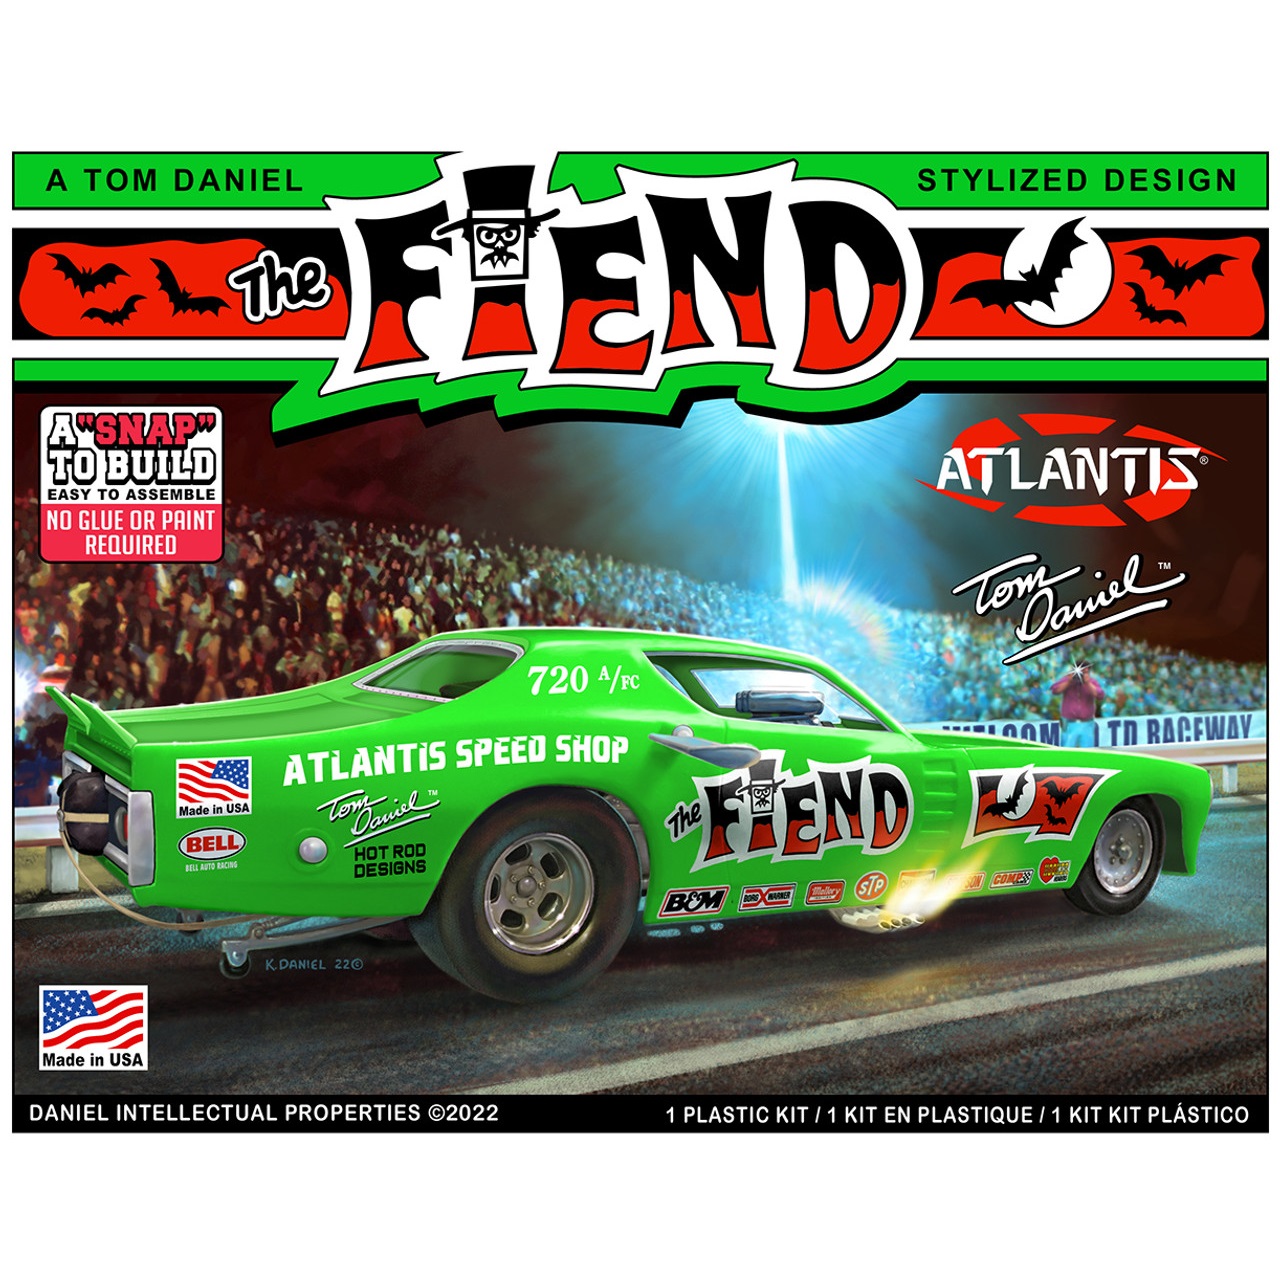 "The Fiend Funny Car"